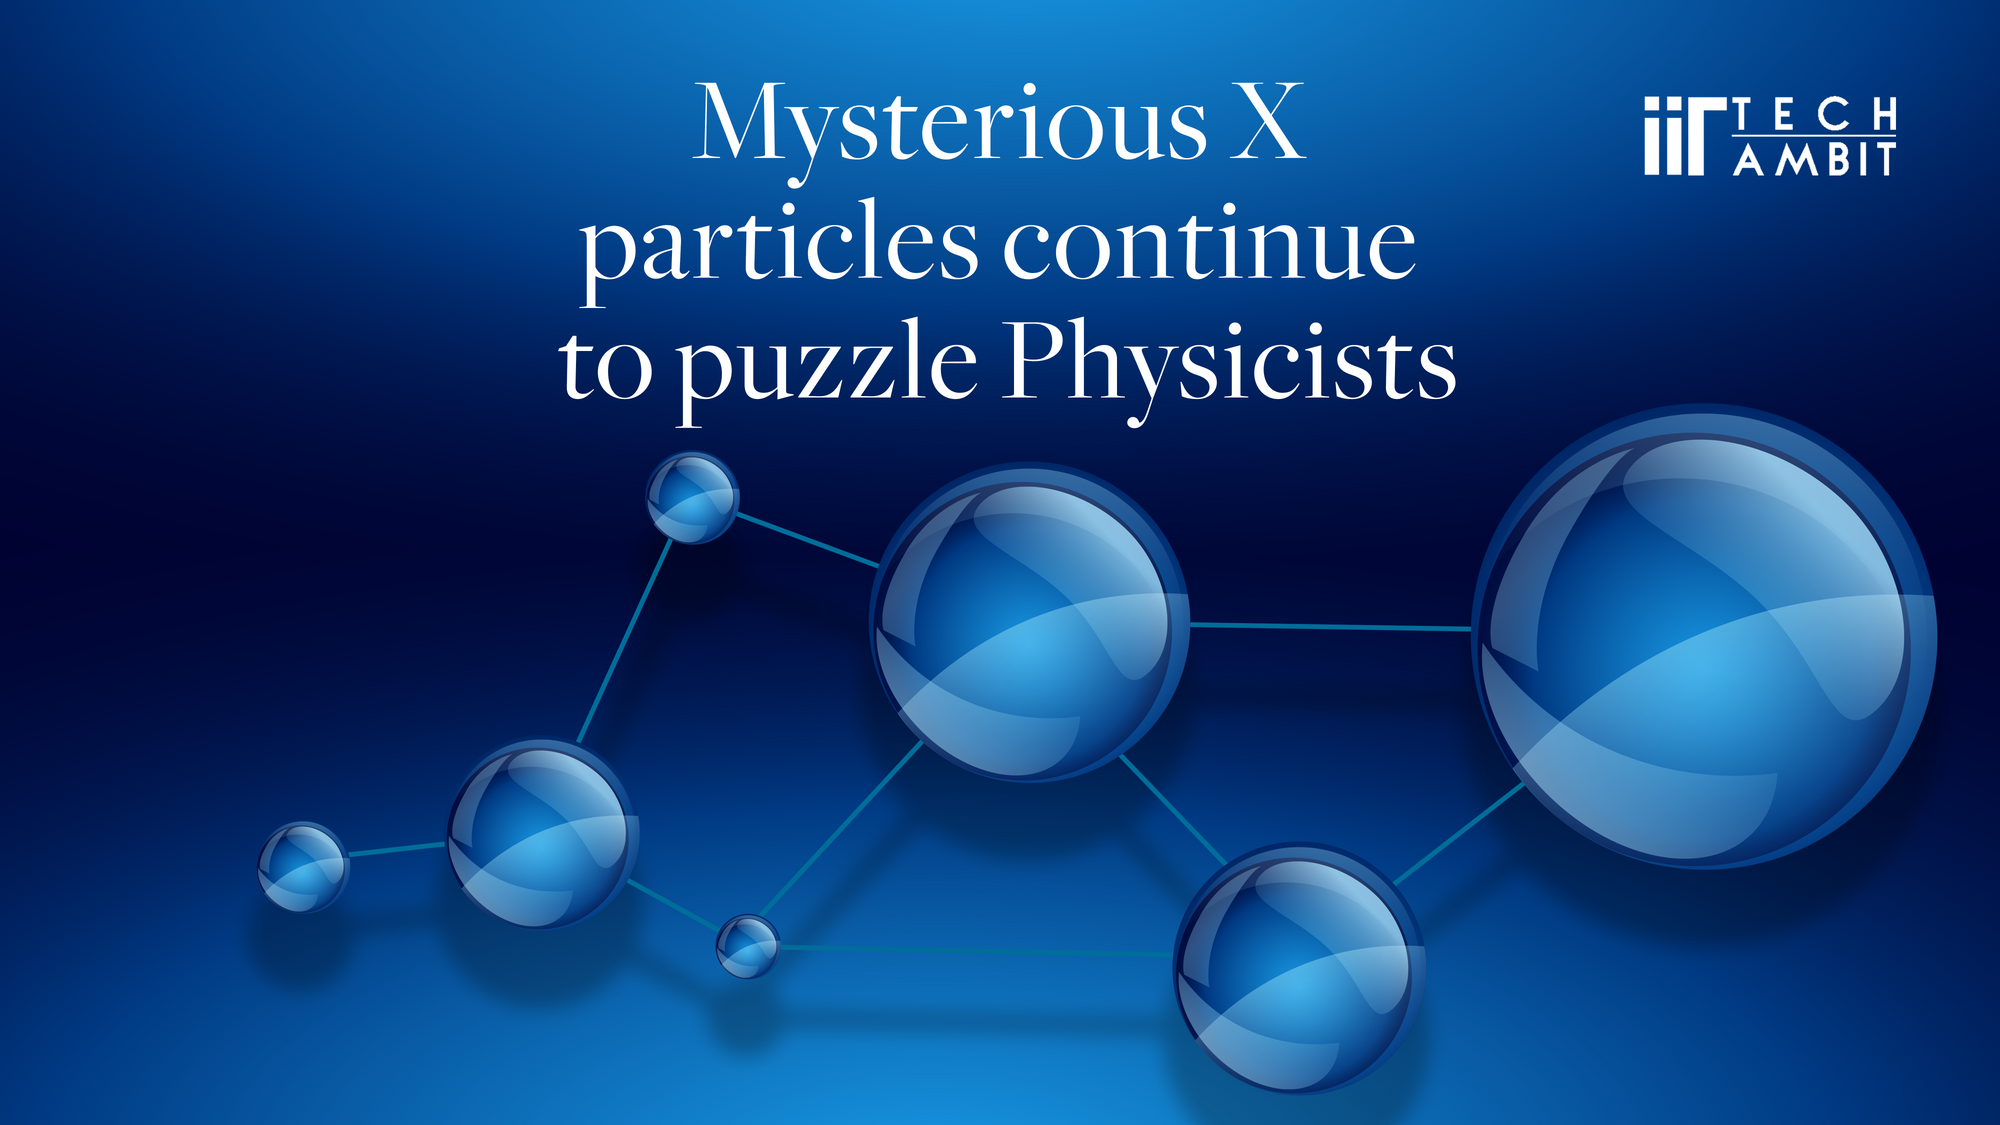 Mysterious X particles continue to puzzle Physicists